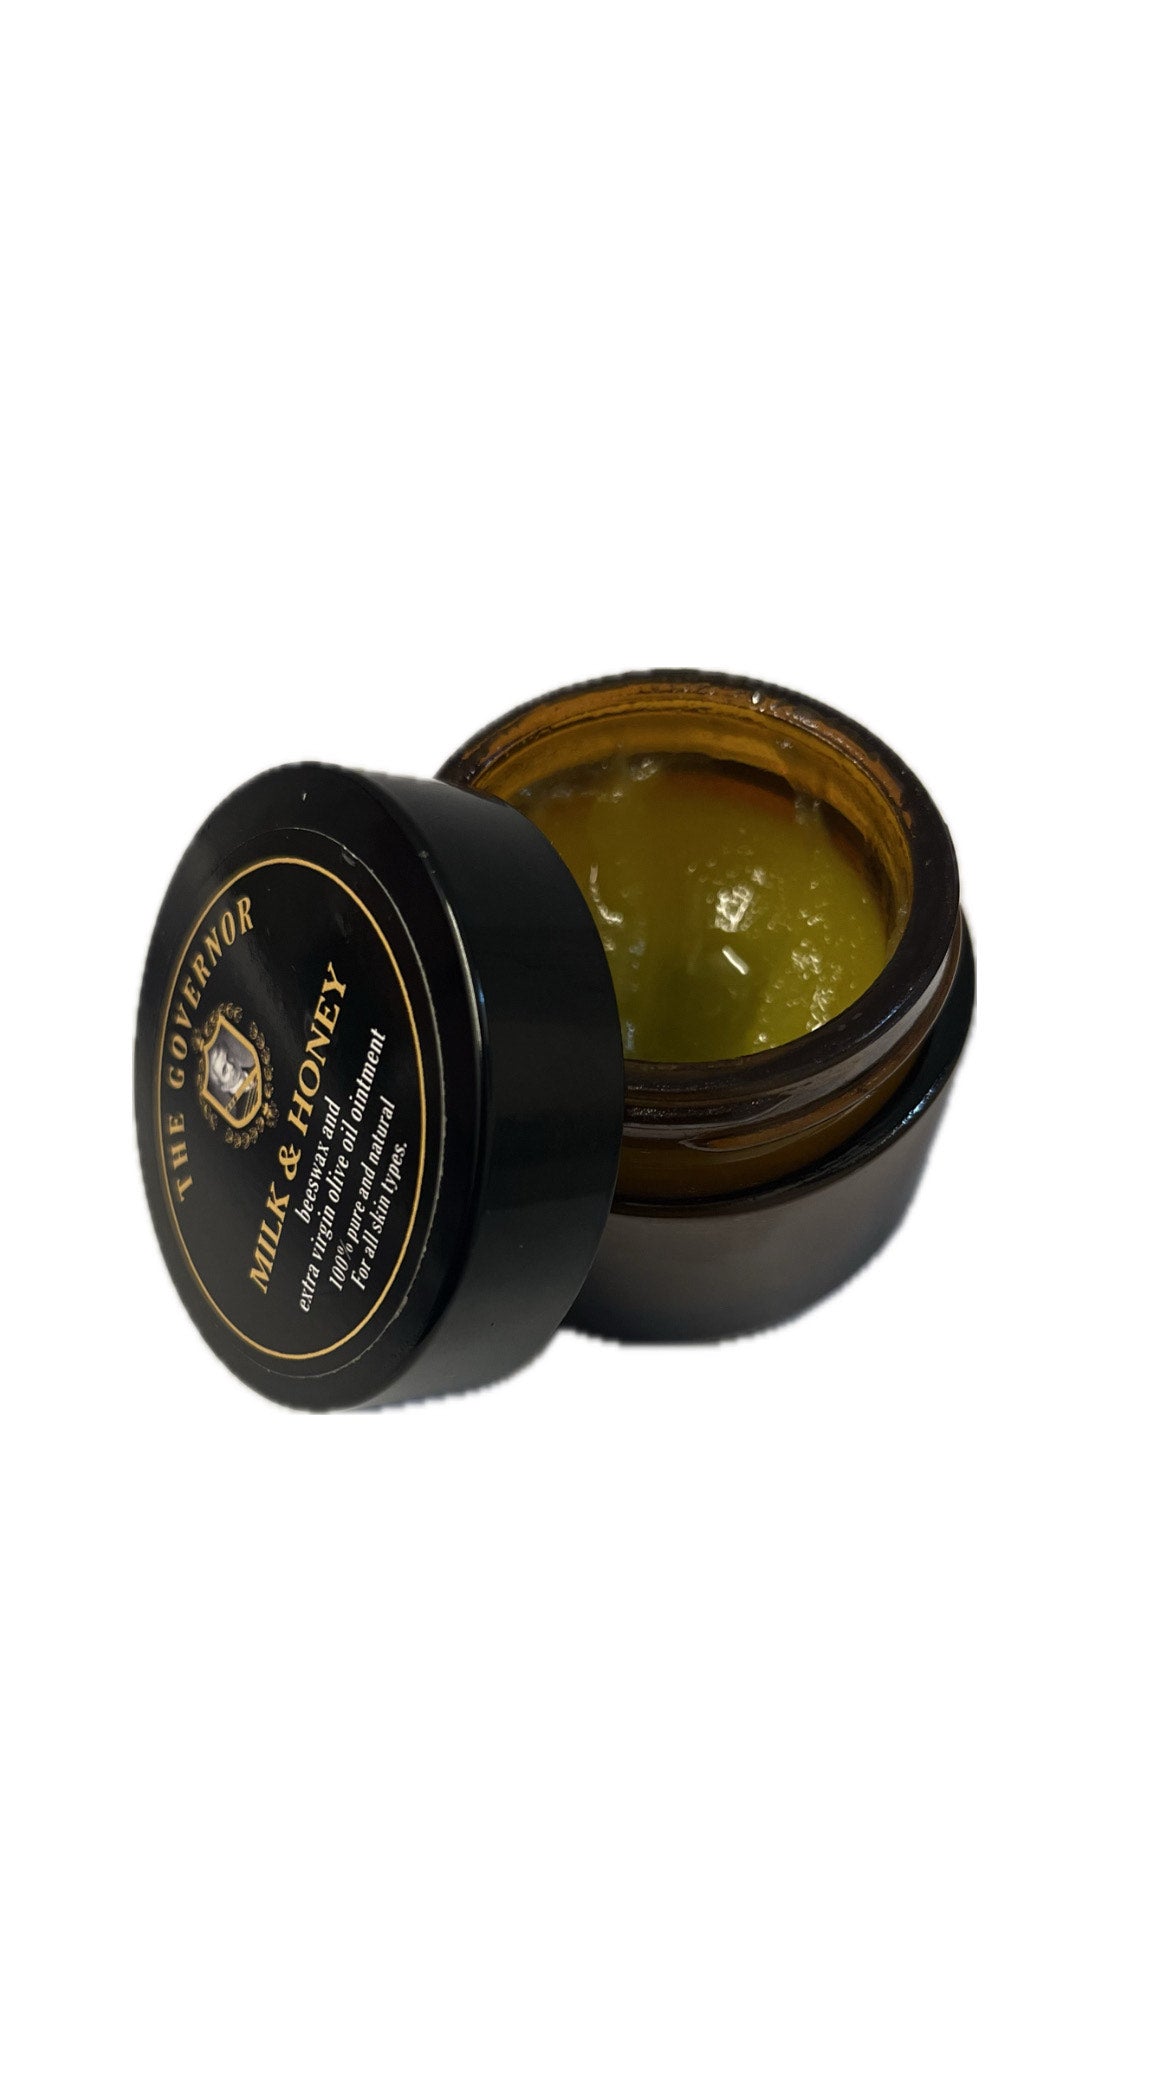 NEW: The Governor Olive Oil and Beeswax Ointment